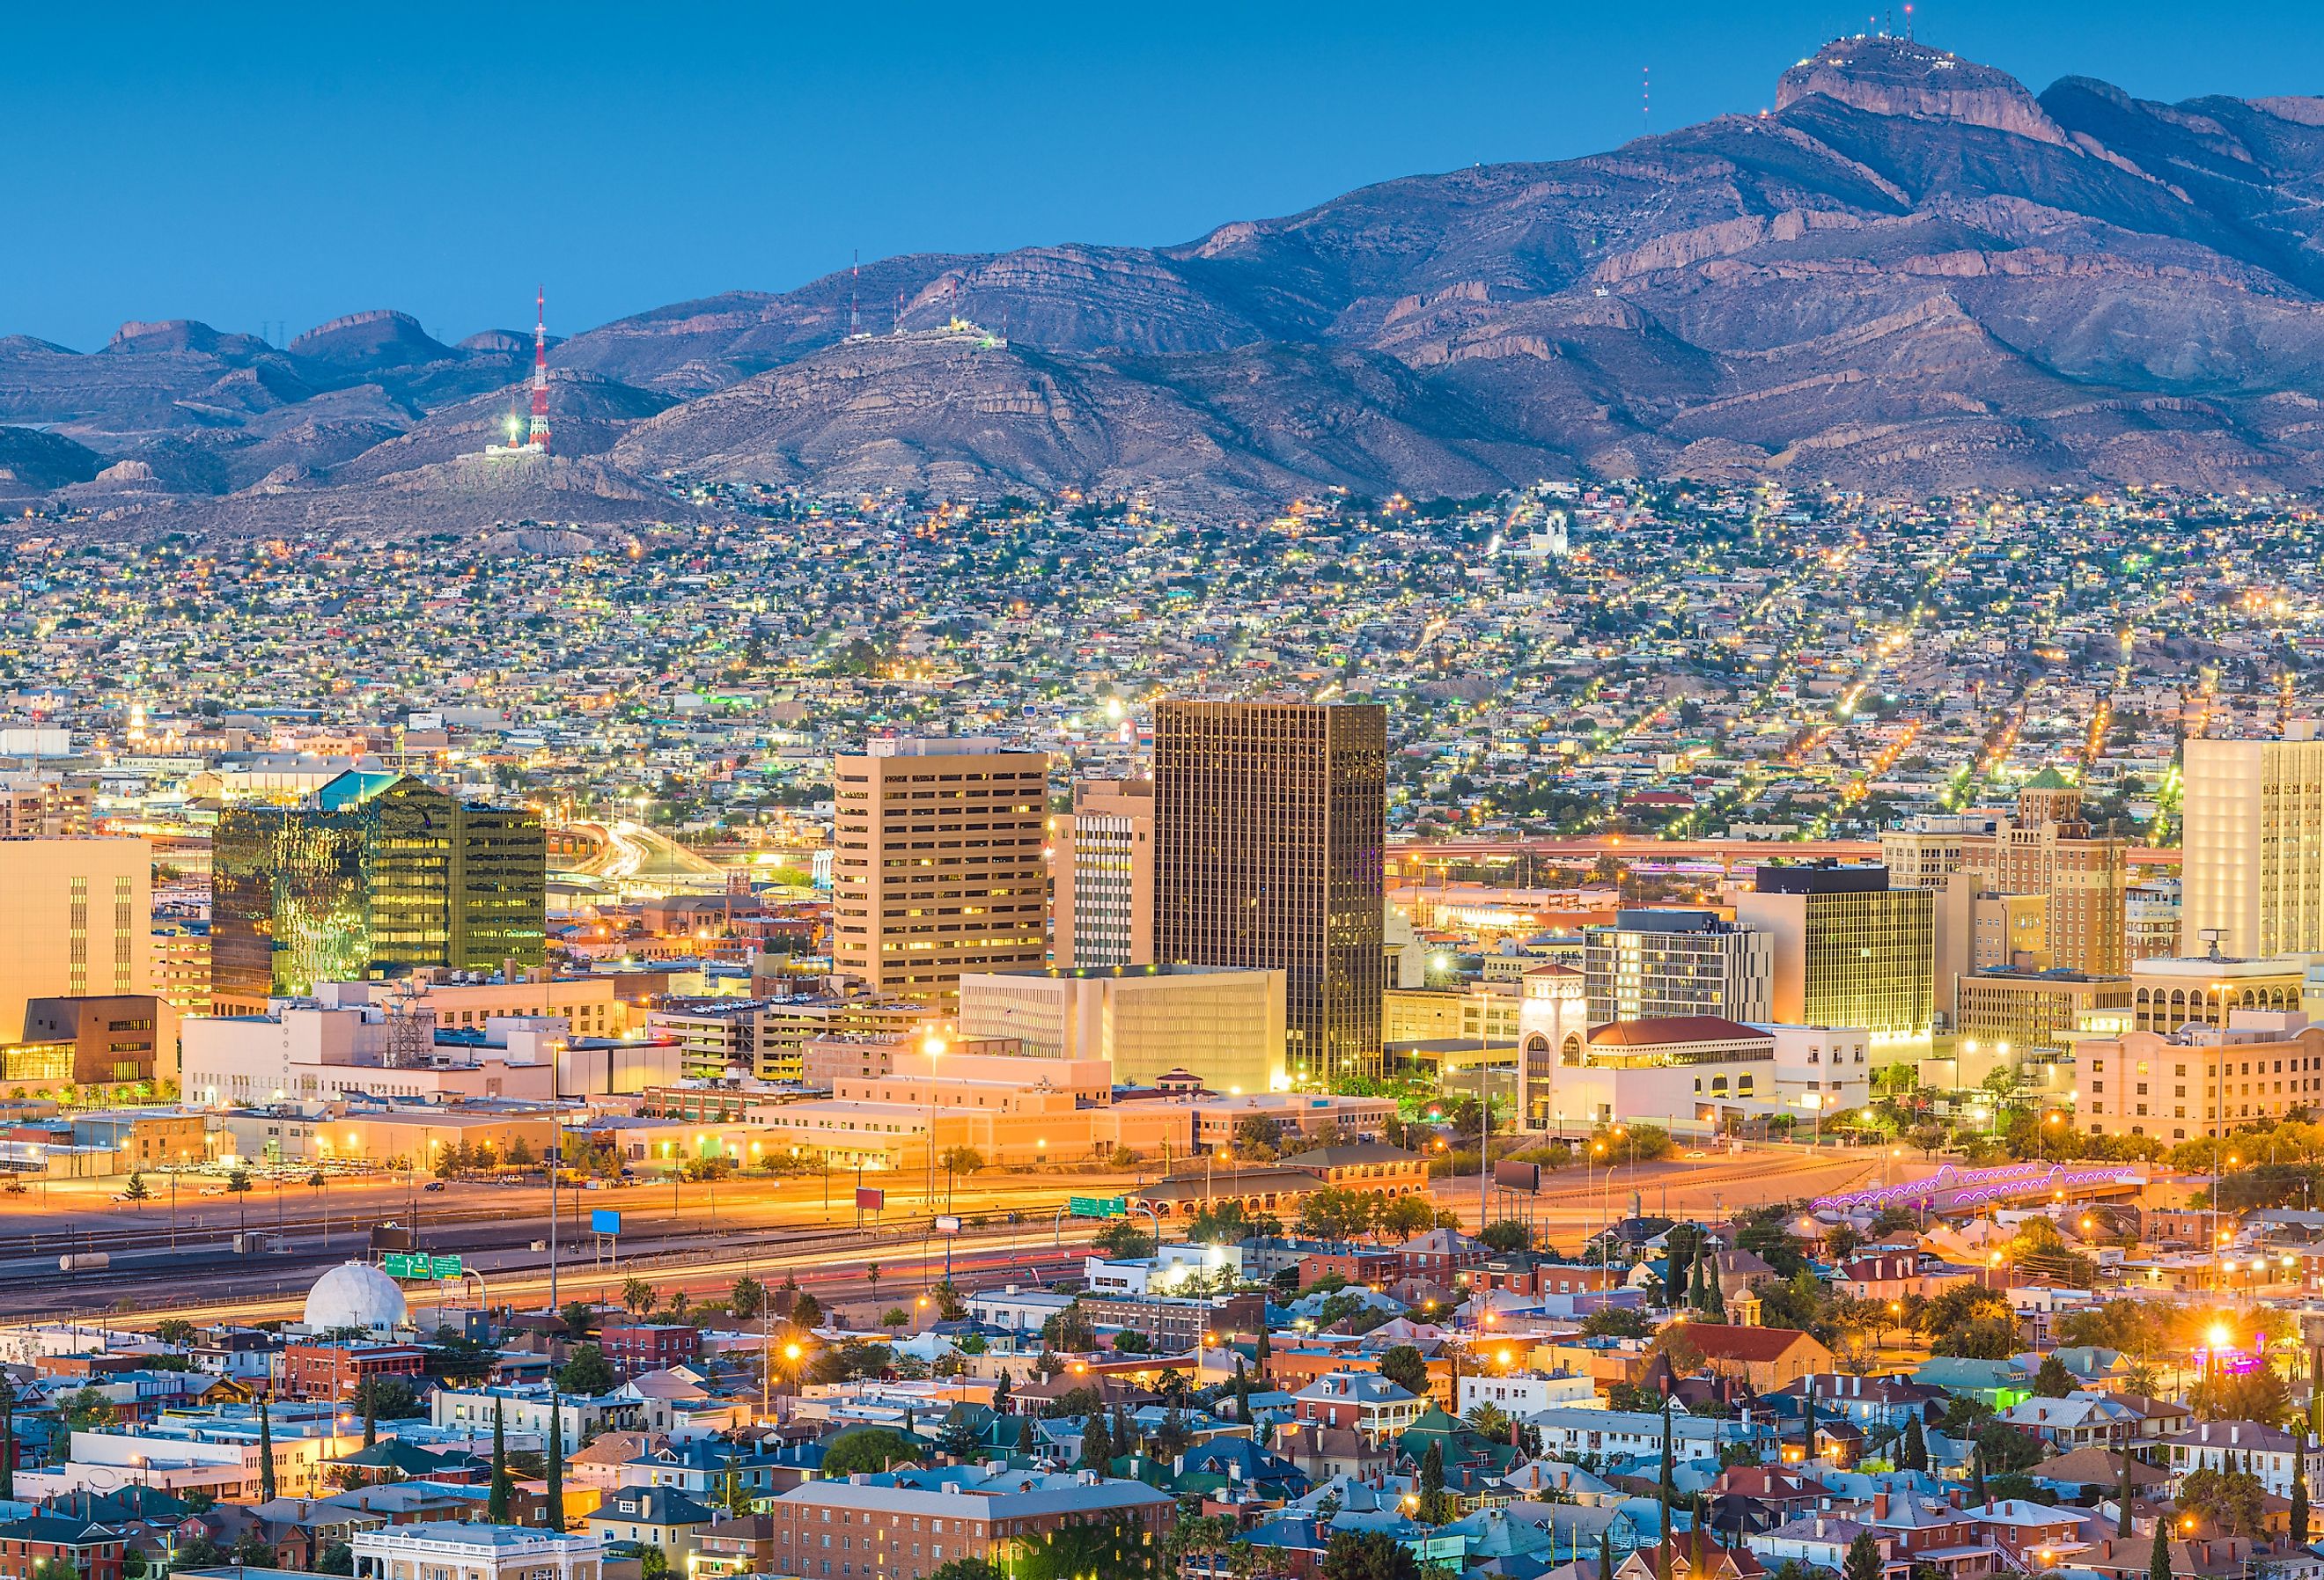 El Paso, Texas, downtown city skyline at dusk with Juarez, Mexico in the distance.